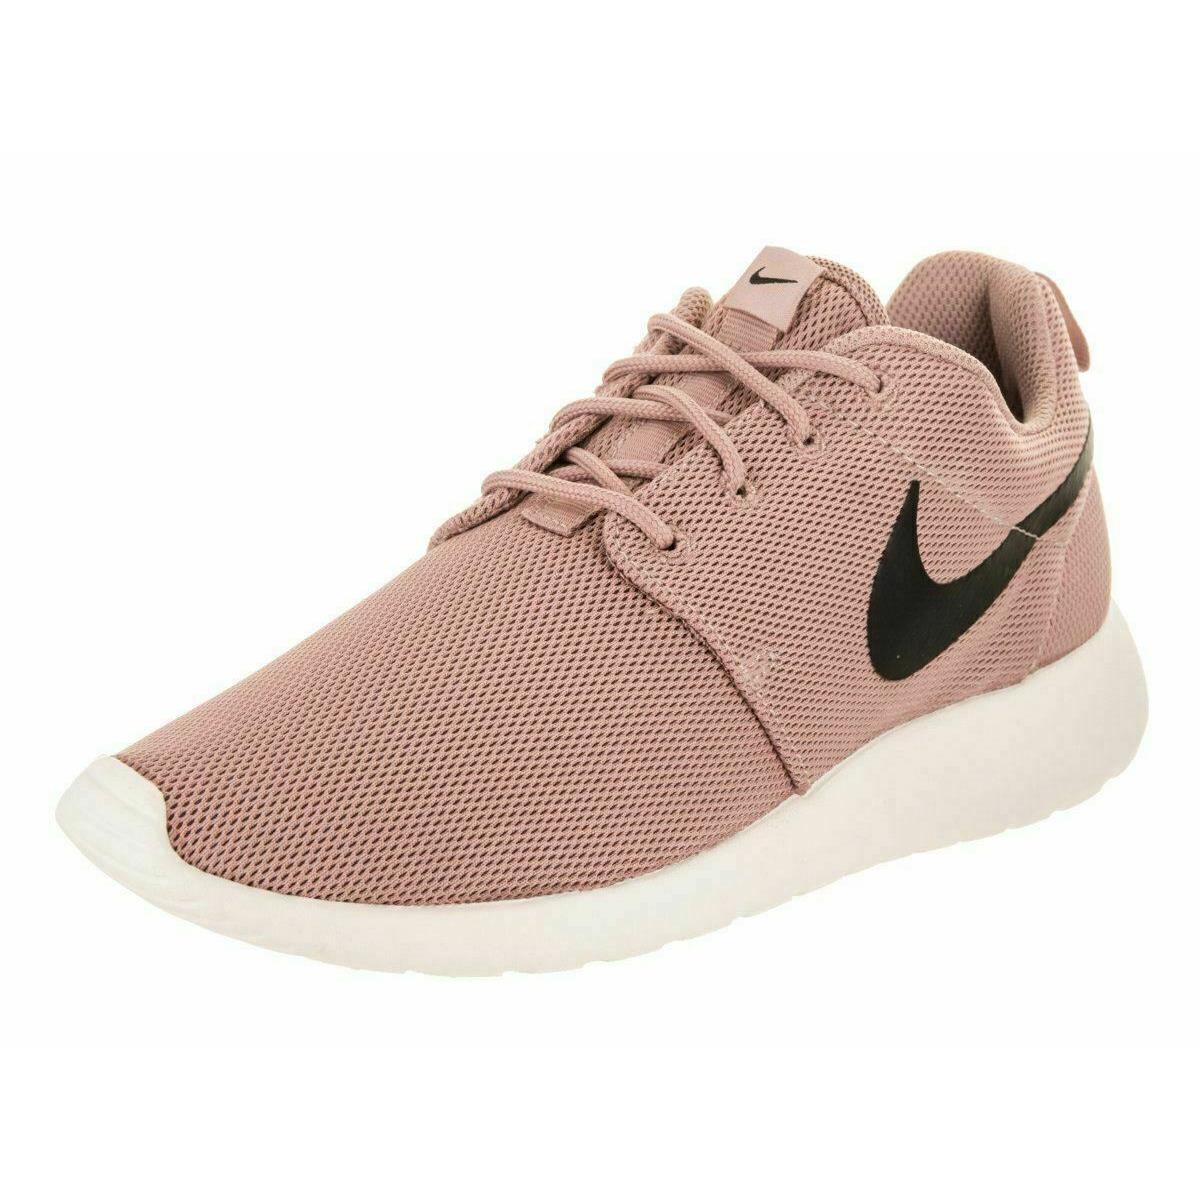 Nike shoes Roshe One - Brown & White 1